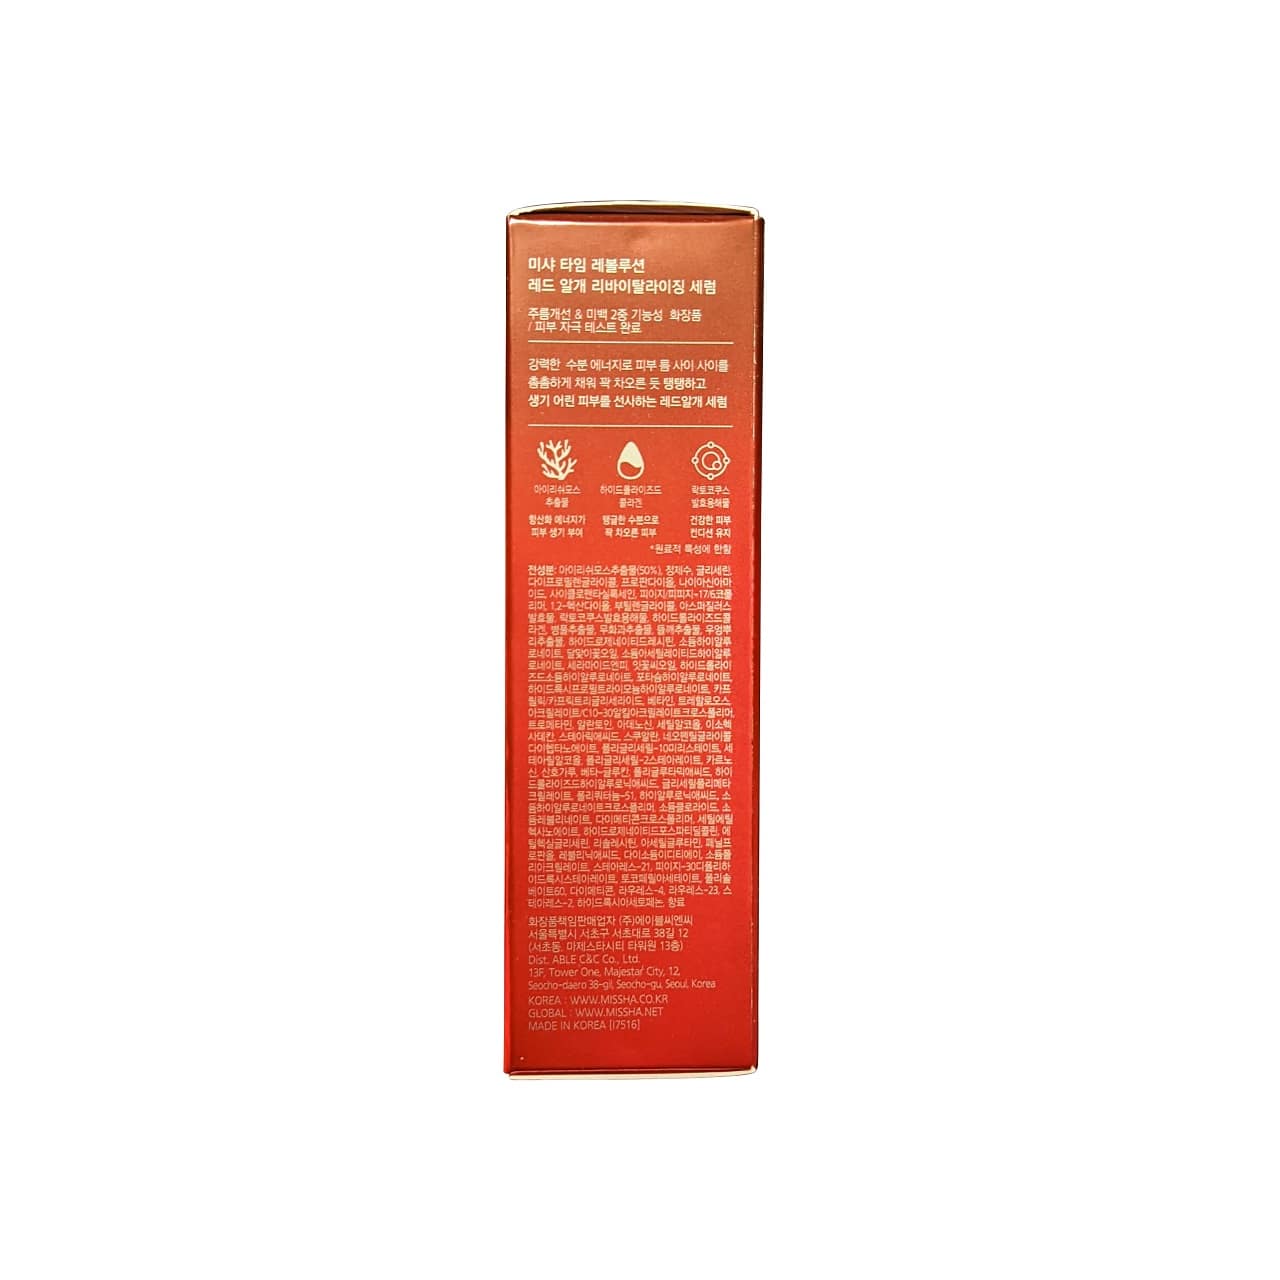 Ingredients, directions, and cautions for MISSHA Time Revolution Red Algae Revitalizing Serum (40 mL) in Korean